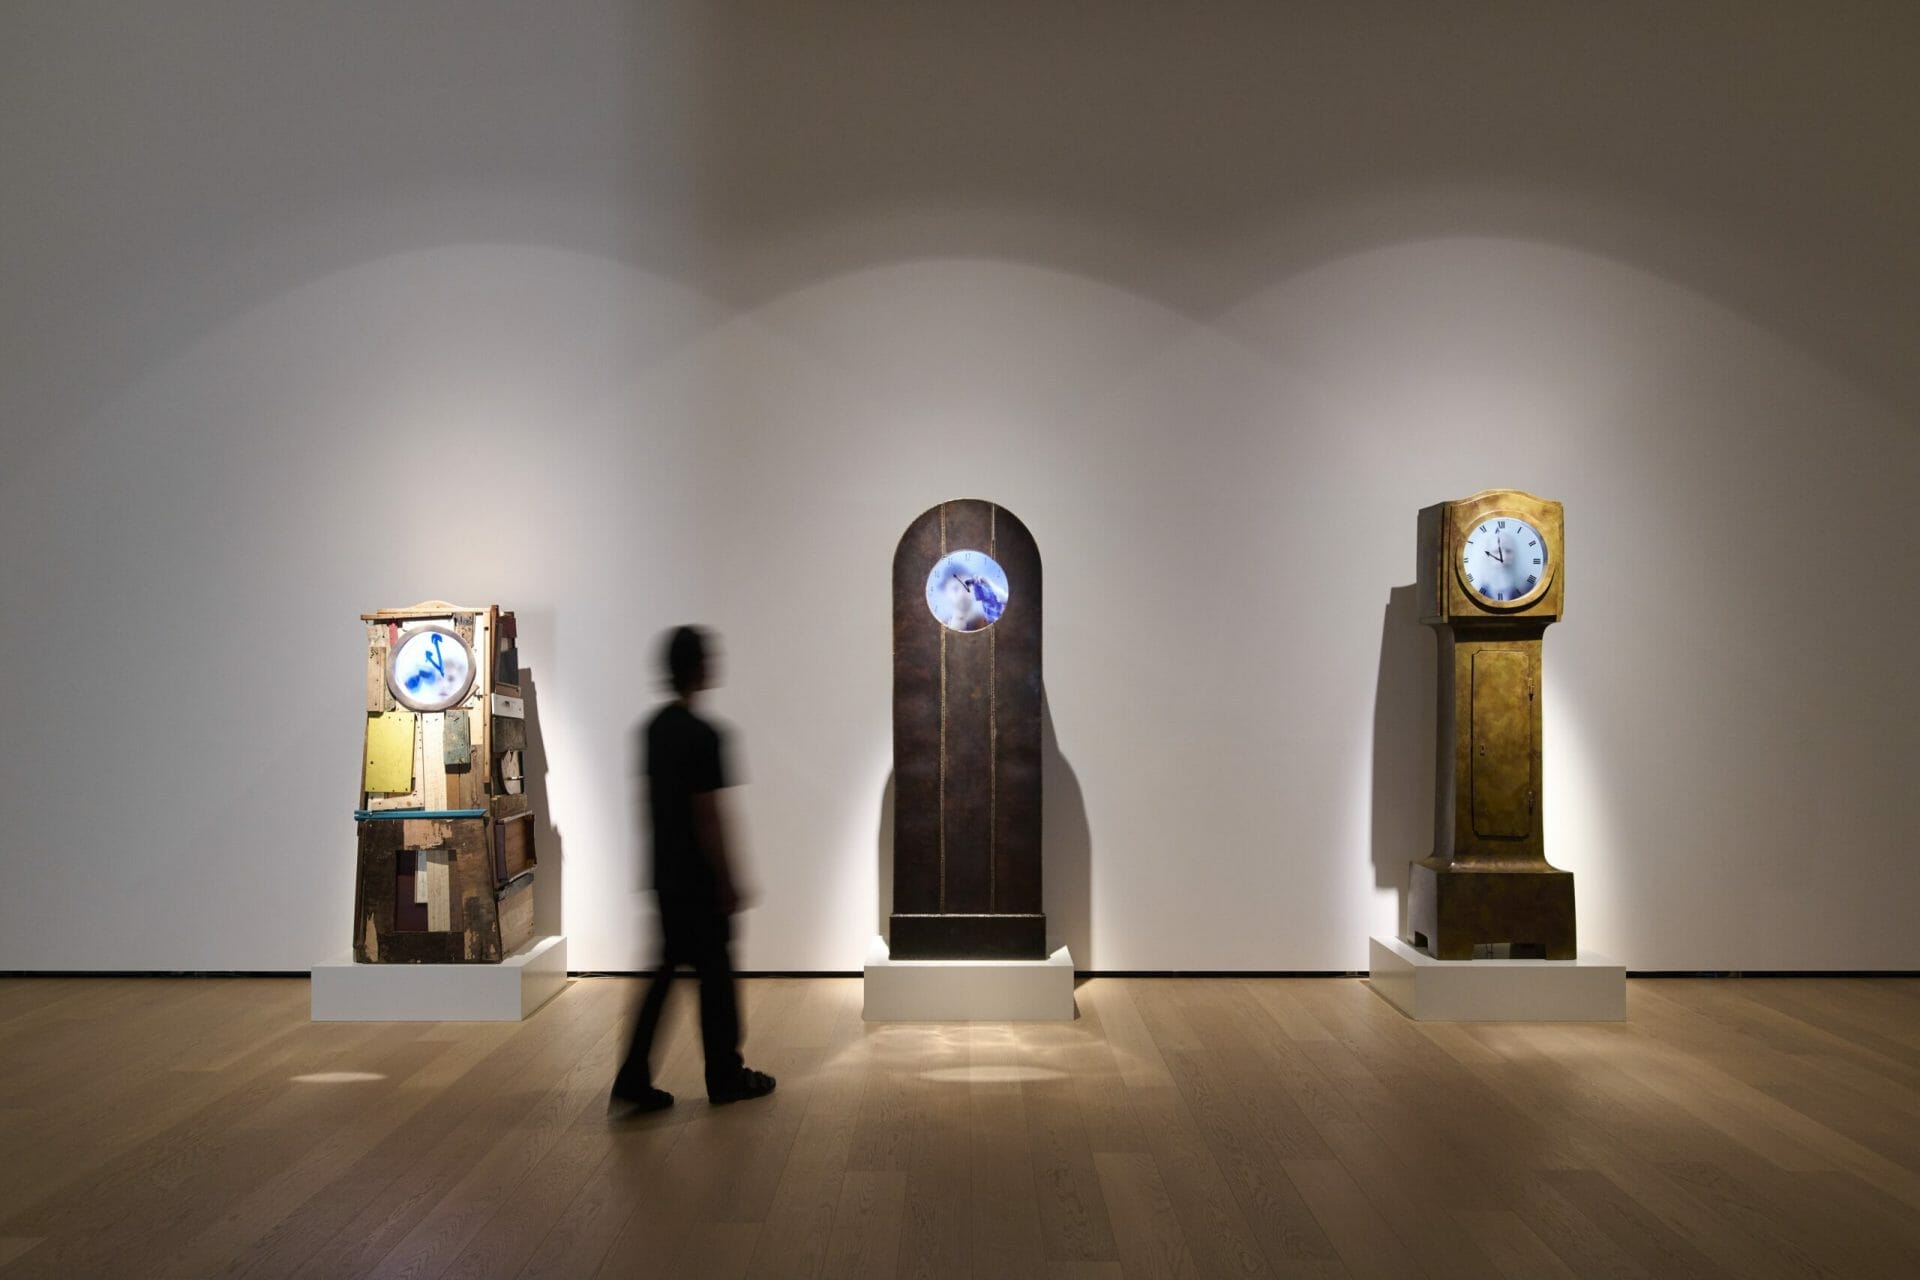 Links | left Maarten Baas, Real Time Grandfather Clock, The Son, 2022 Courtesy Carpenters Workshop Gallery Midden | centre Maarten Baas, Real Time Grandfather Clock, Self Portrait, 2019 Collection of the artist Rechts | right Maarten Baas, Real Time Grandfather Clock, The Son, 2022 Courtesy Carpenters Workshop Gallery Foto | photo: Antoine van Kaam